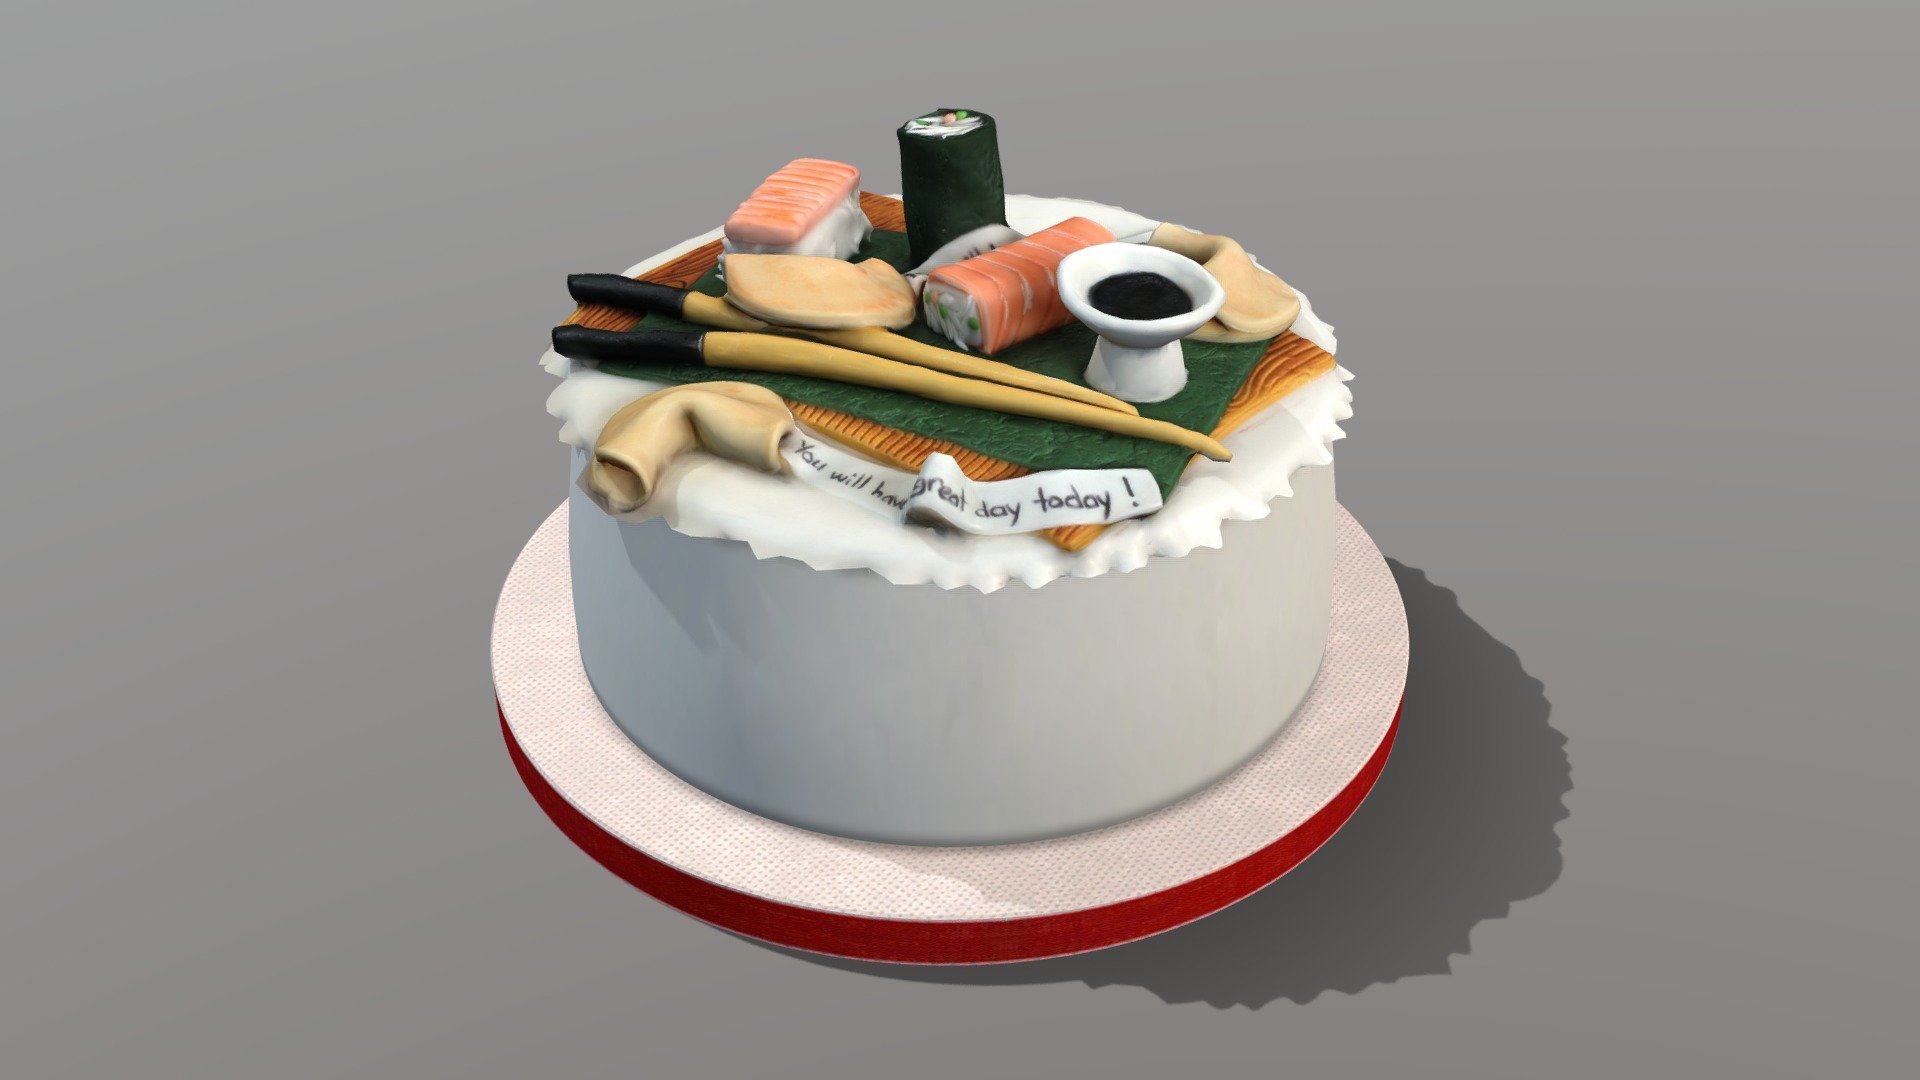 3D scan of a delicious Sushi Cake which is made by CAKESBURG Online Premium Cake Shop in UK. You can also order real cake from this link: https://cakesburg.co.uk/products/sushi-cake-1?_pos=1&amp;_sid=b8c2bb194&amp;_ss=r

Textures 4096*4096px PBR photoscan-based materials Base Color, Normal, Roughness, Specular) - Sushi Cake - Buy Royalty Free 3D model by Cakesburg Premium 3D Cake Shop (@Viscom_Cakesburg) 3d model